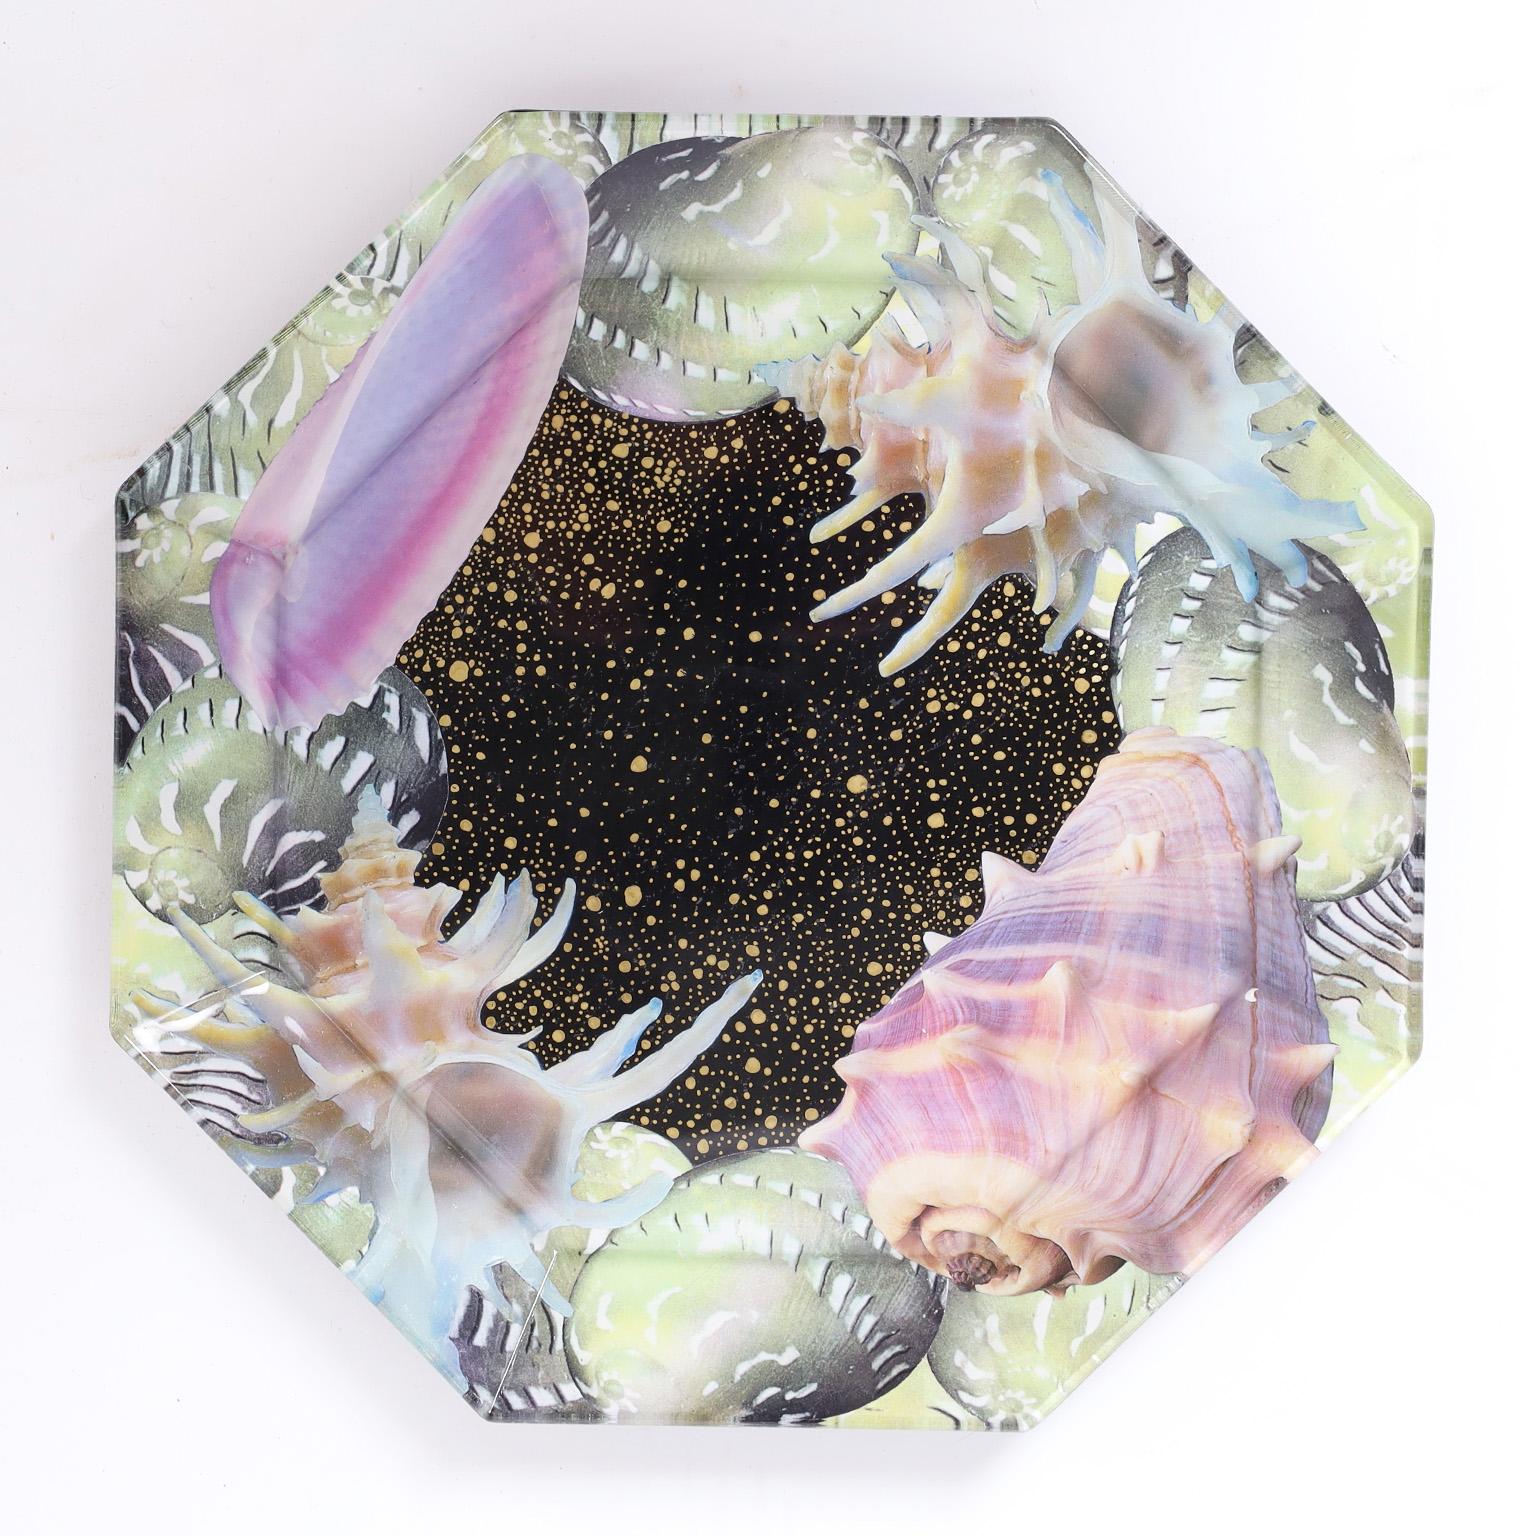 Striking set of six glass plates with an octagon form decorated with seashells in a whimsical reverse decoupage technique. Signed Pablo Manzoni on the bottoms.